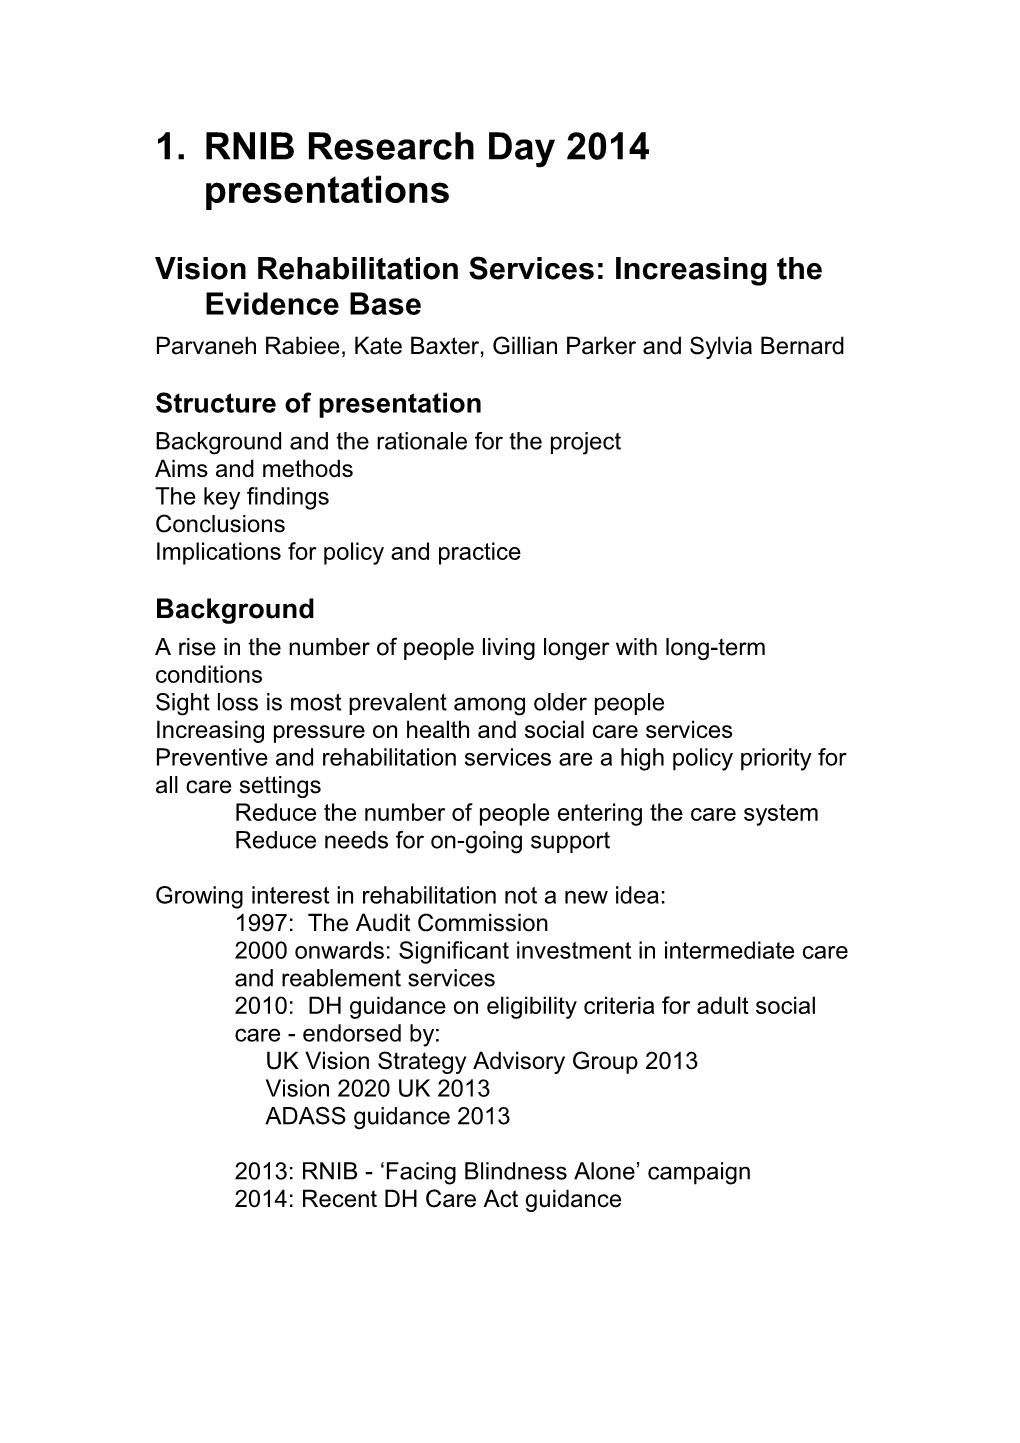 Vision Rehabilitation Services: Increasing the Evidence Base